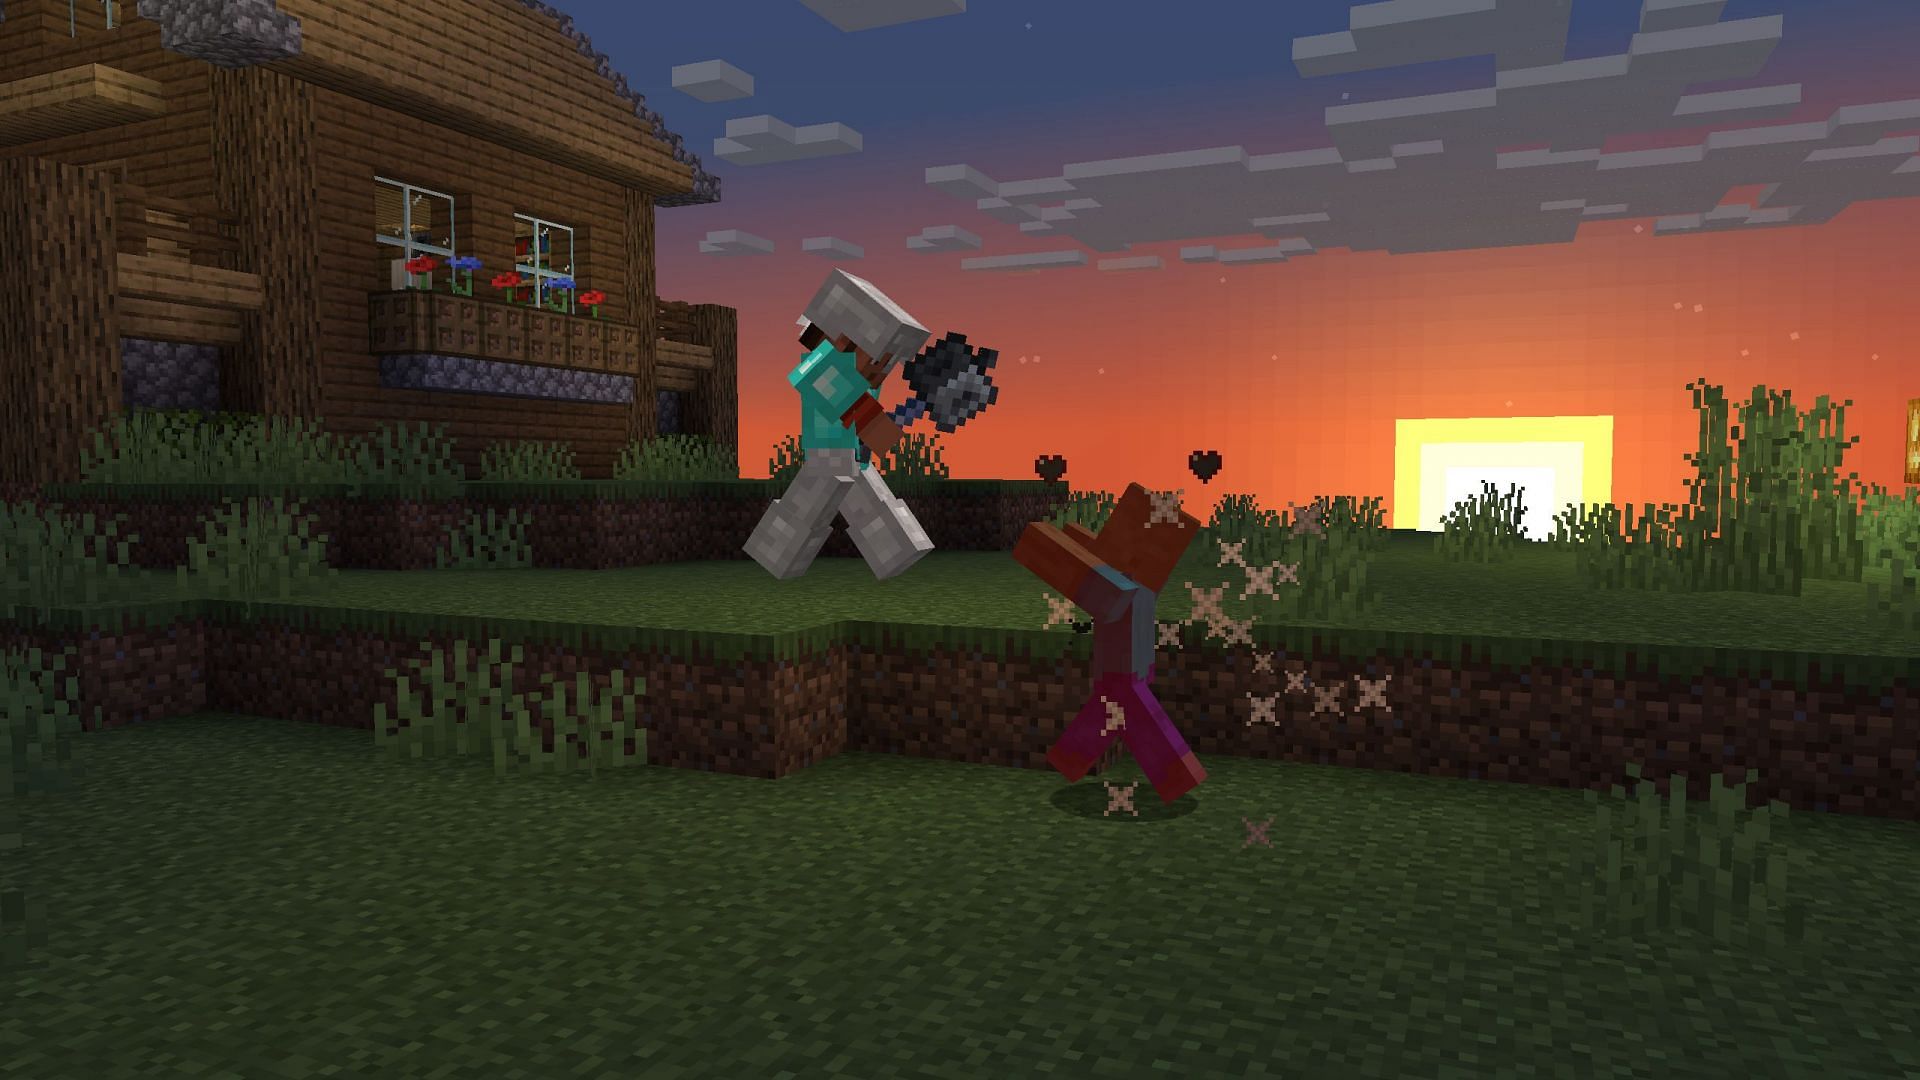 Will mace enchantments cause game balance issues in Minecraft? (Image via Mojang)